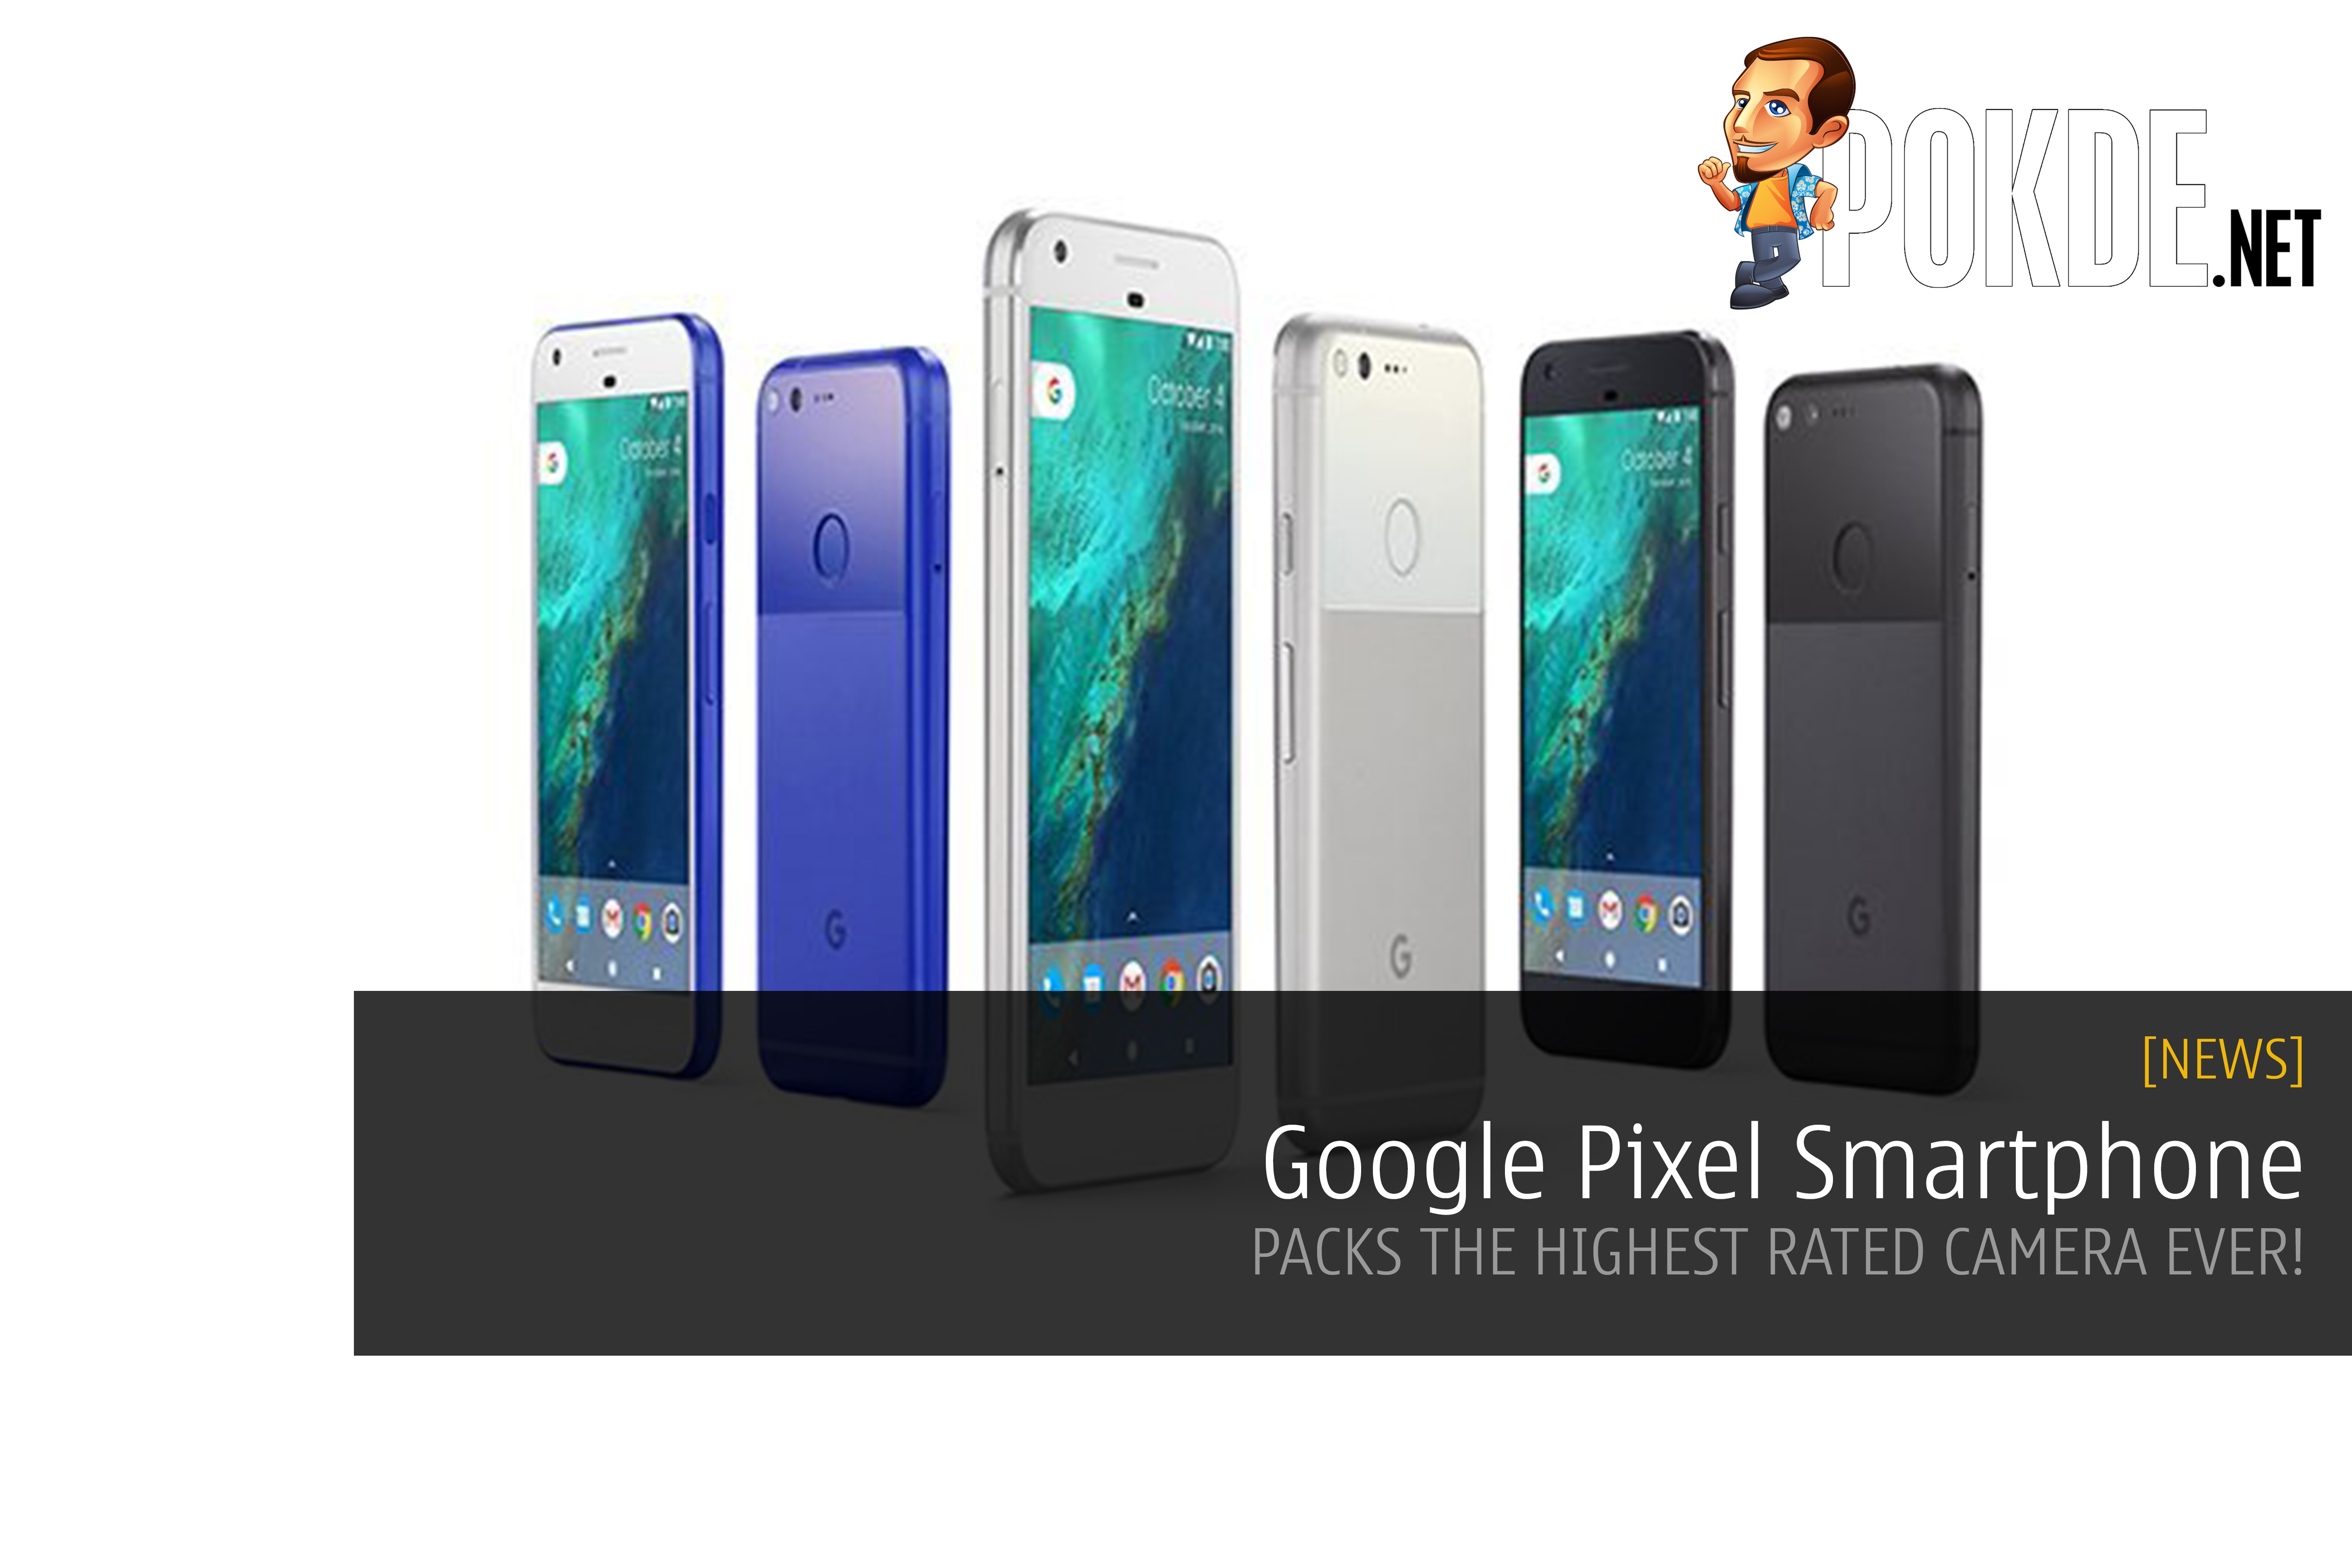 Google Pixel smartphone "made by Google" packs the highest rated camera ever 20